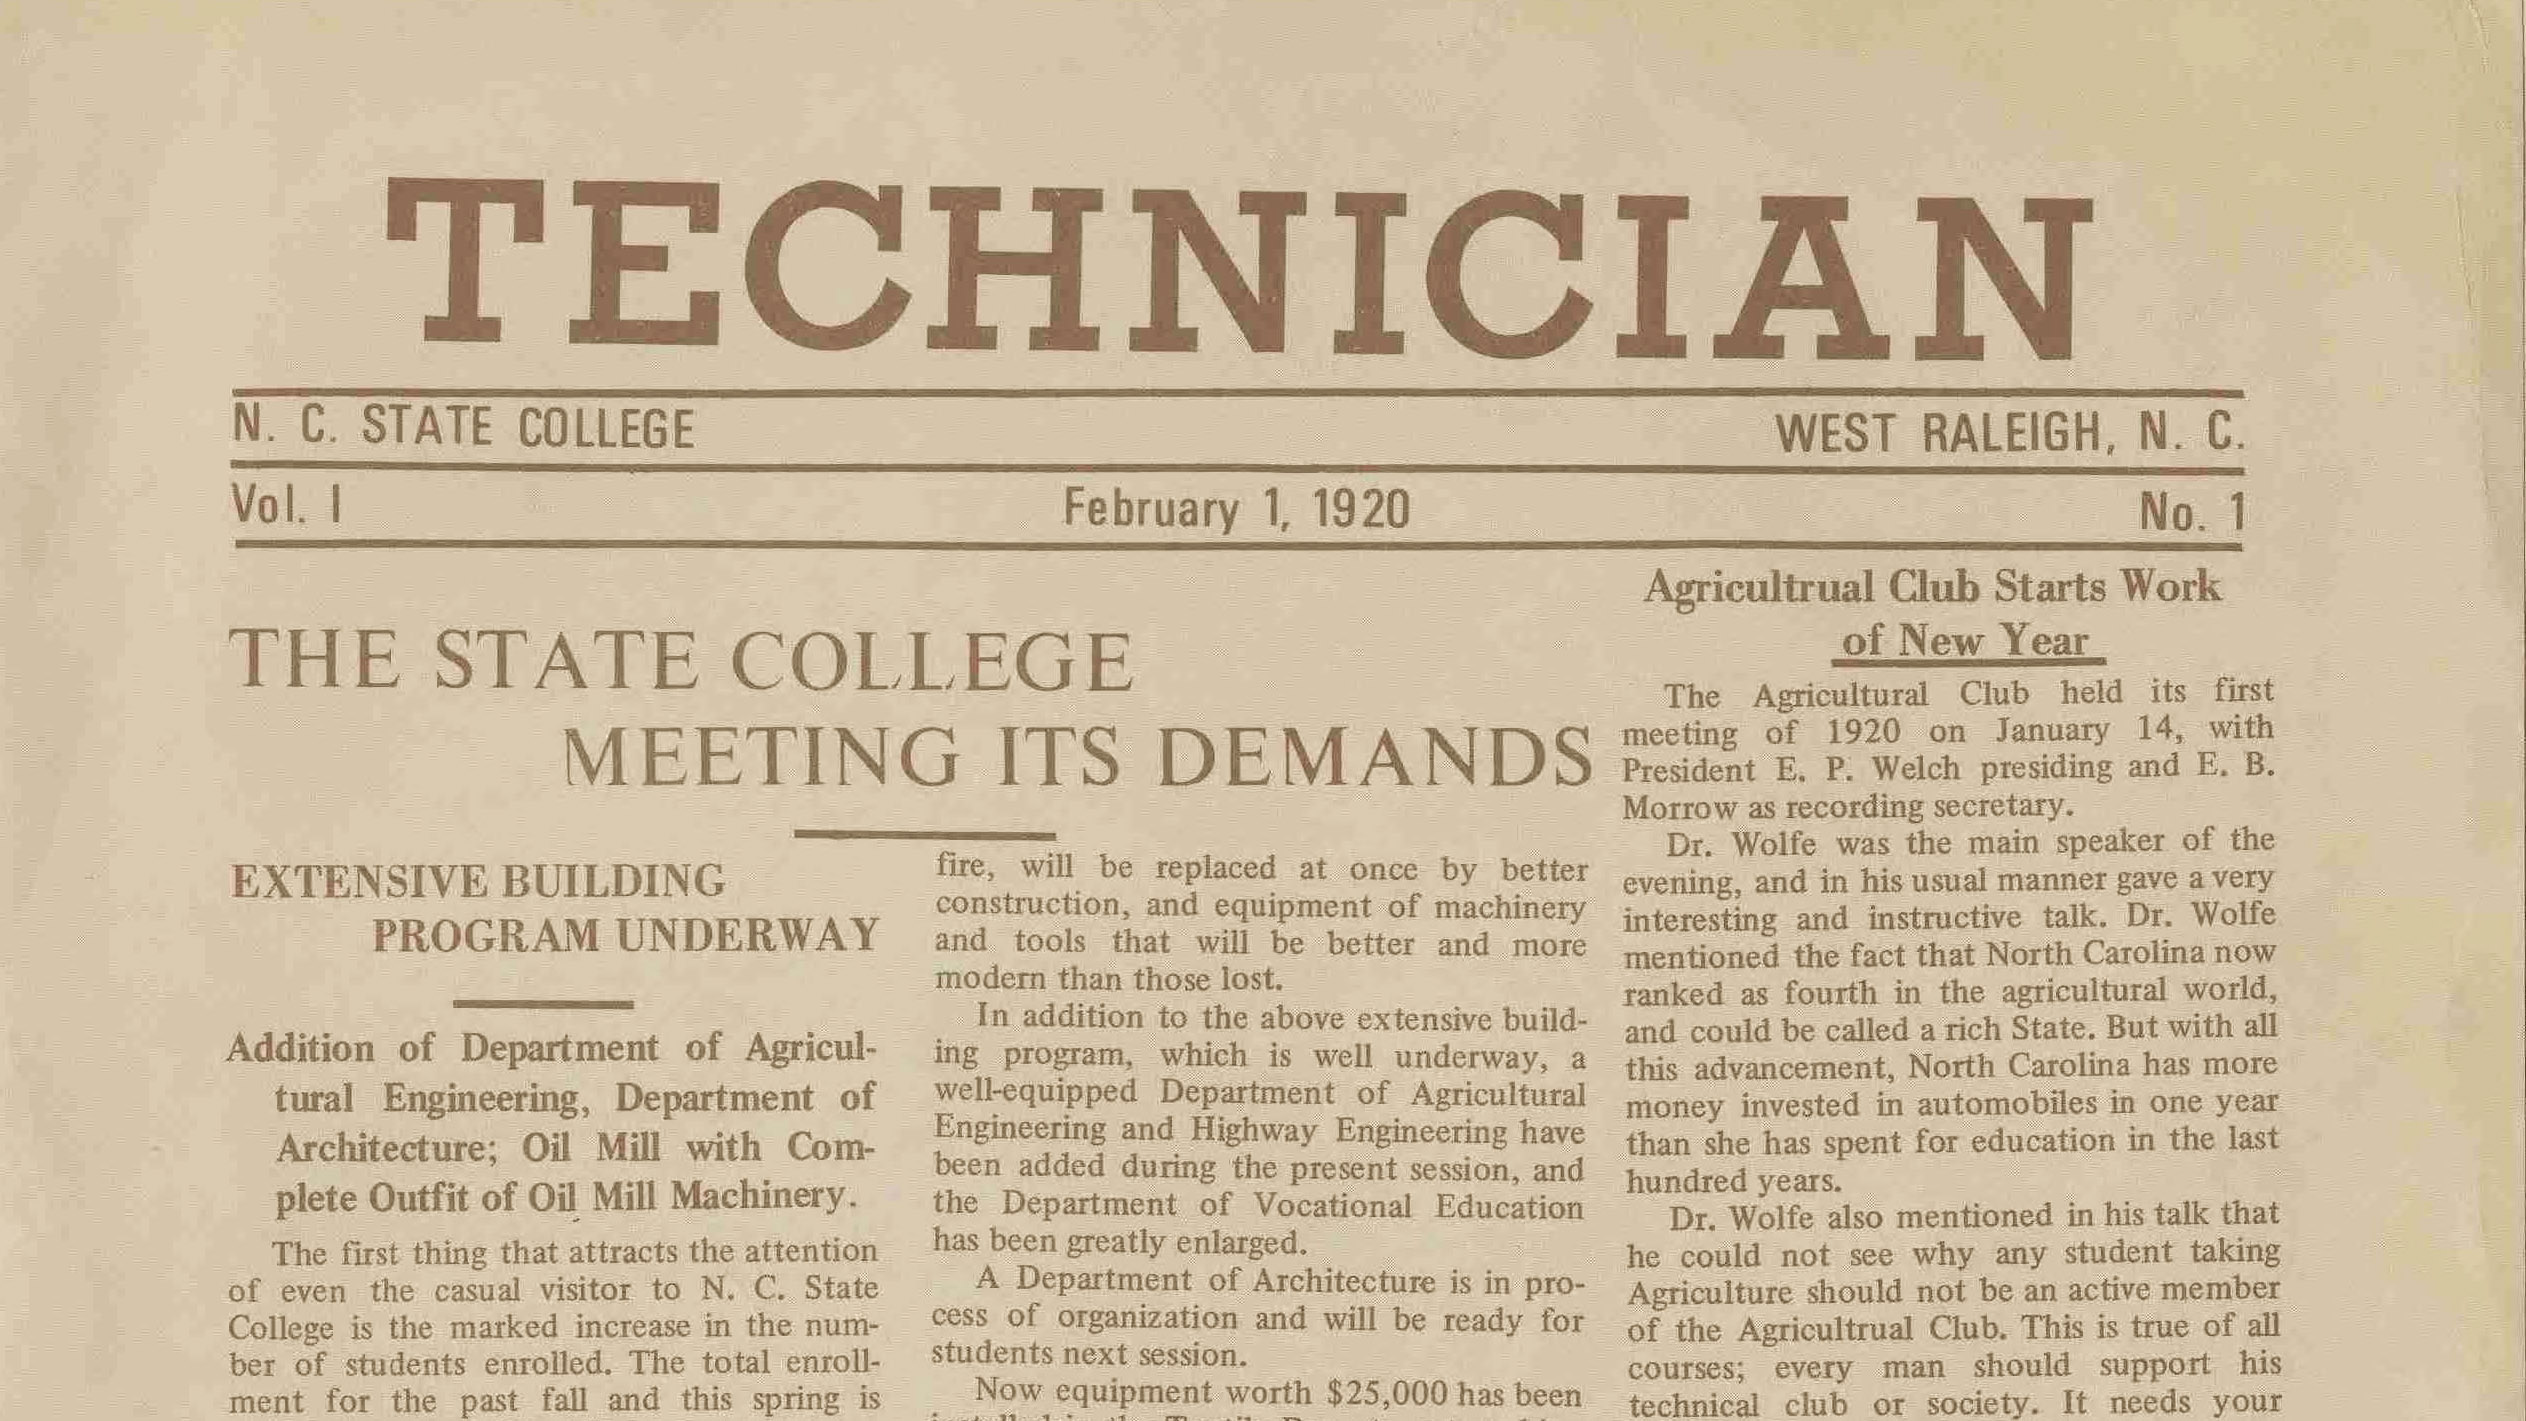 Top of the front page of the first issue of Technician